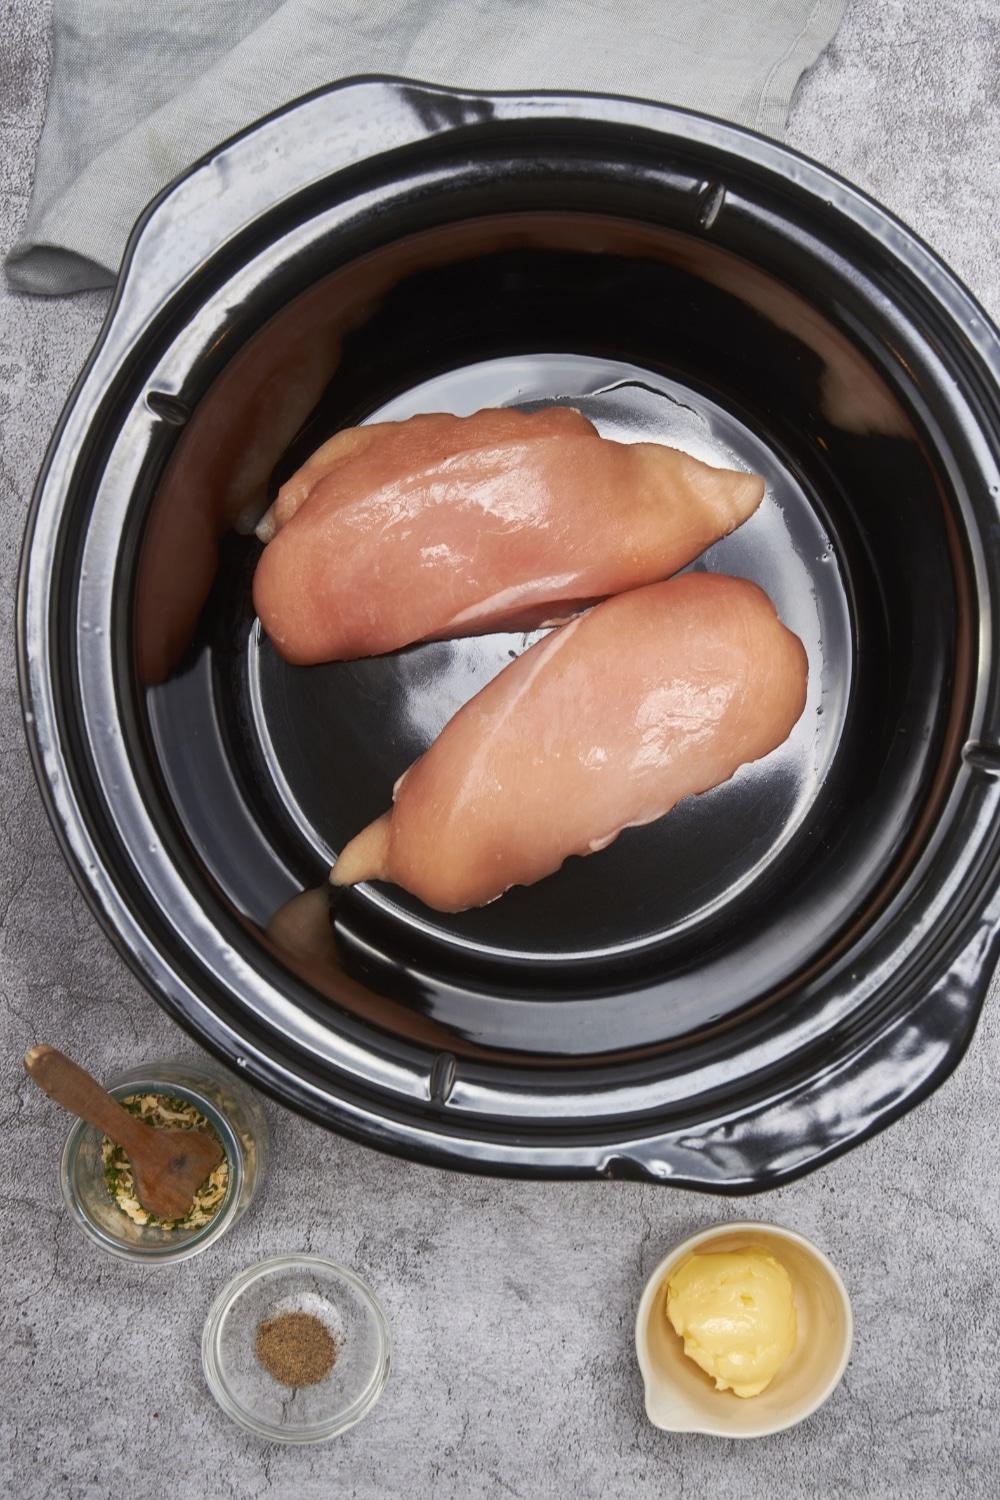 Two raw chicken breasts in the bottom of a black crock pot next to a small bowl of butter, a small bowl of salt and pepper, and a small bowl of seasonings.